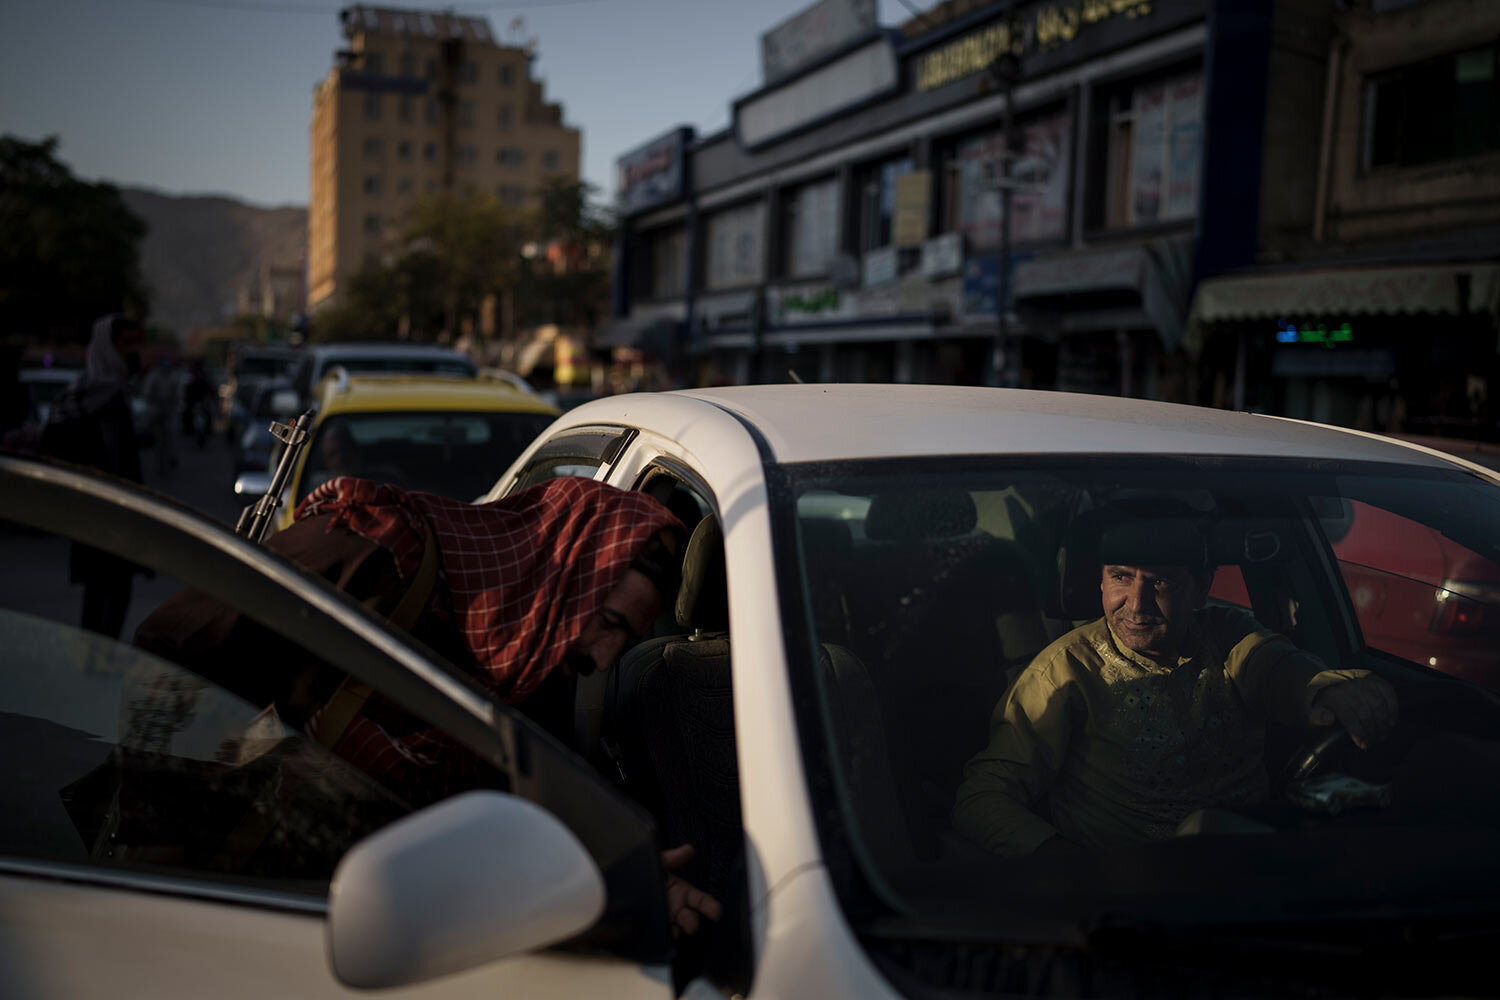  An afghan man looks as a Taliban fighter searches his car at a checkpoint in Kabul, Afghanistan, Tuesday, Sept. 14, 2021. (AP Photo/Felipe Dana)  